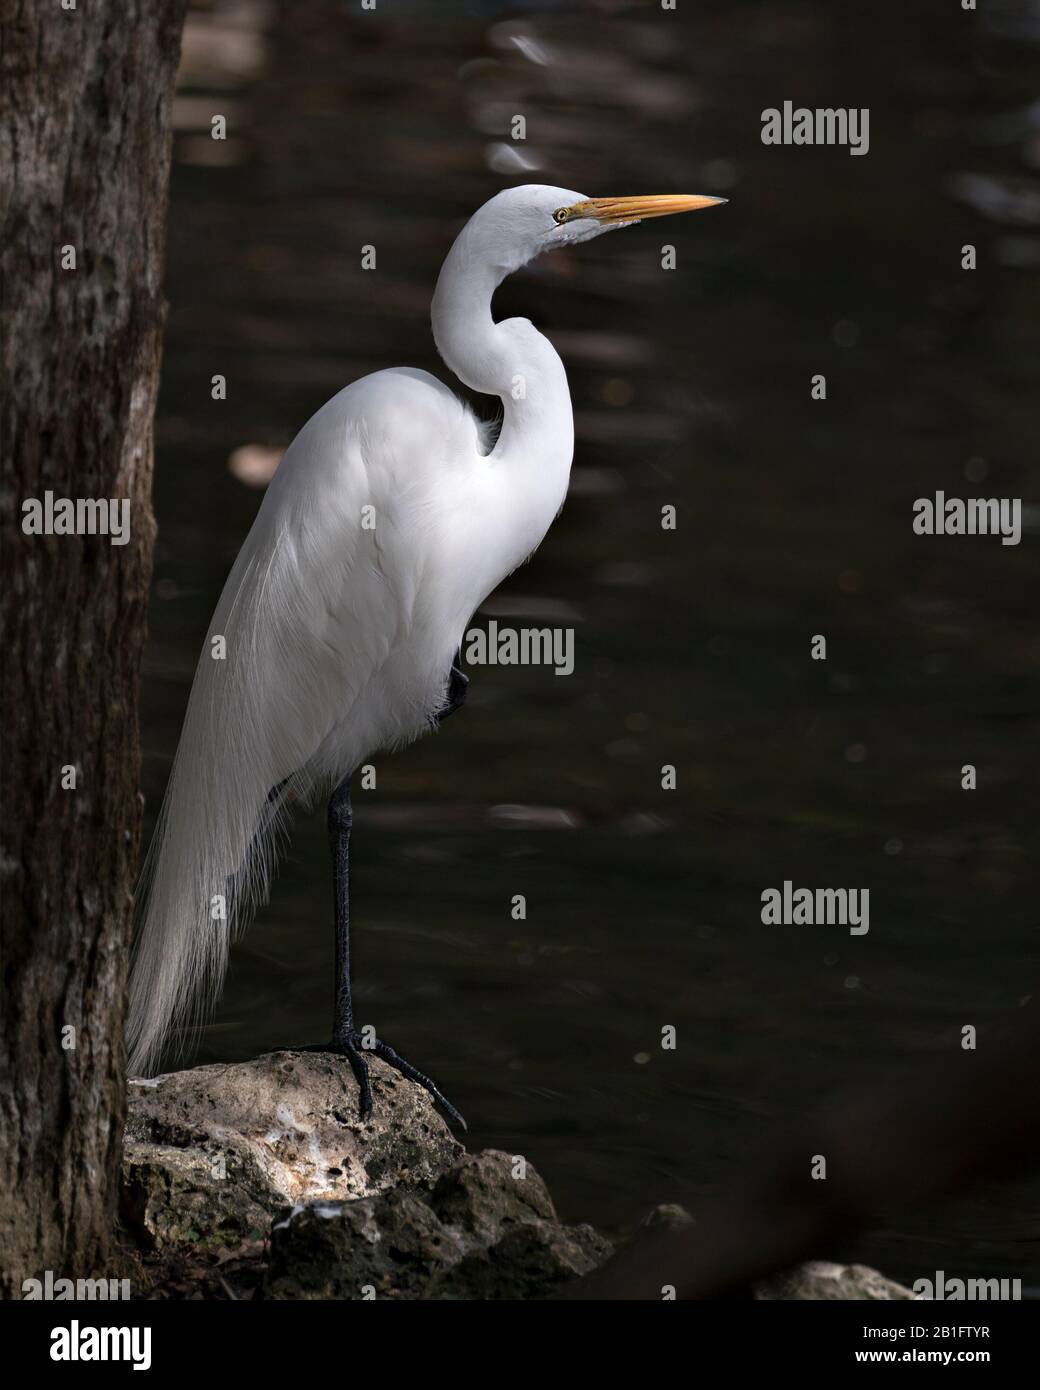 Great White Egret bird close-up profile view standing on a rock with moss with a black background contrast by the water in its environment and surroun Stock Photo